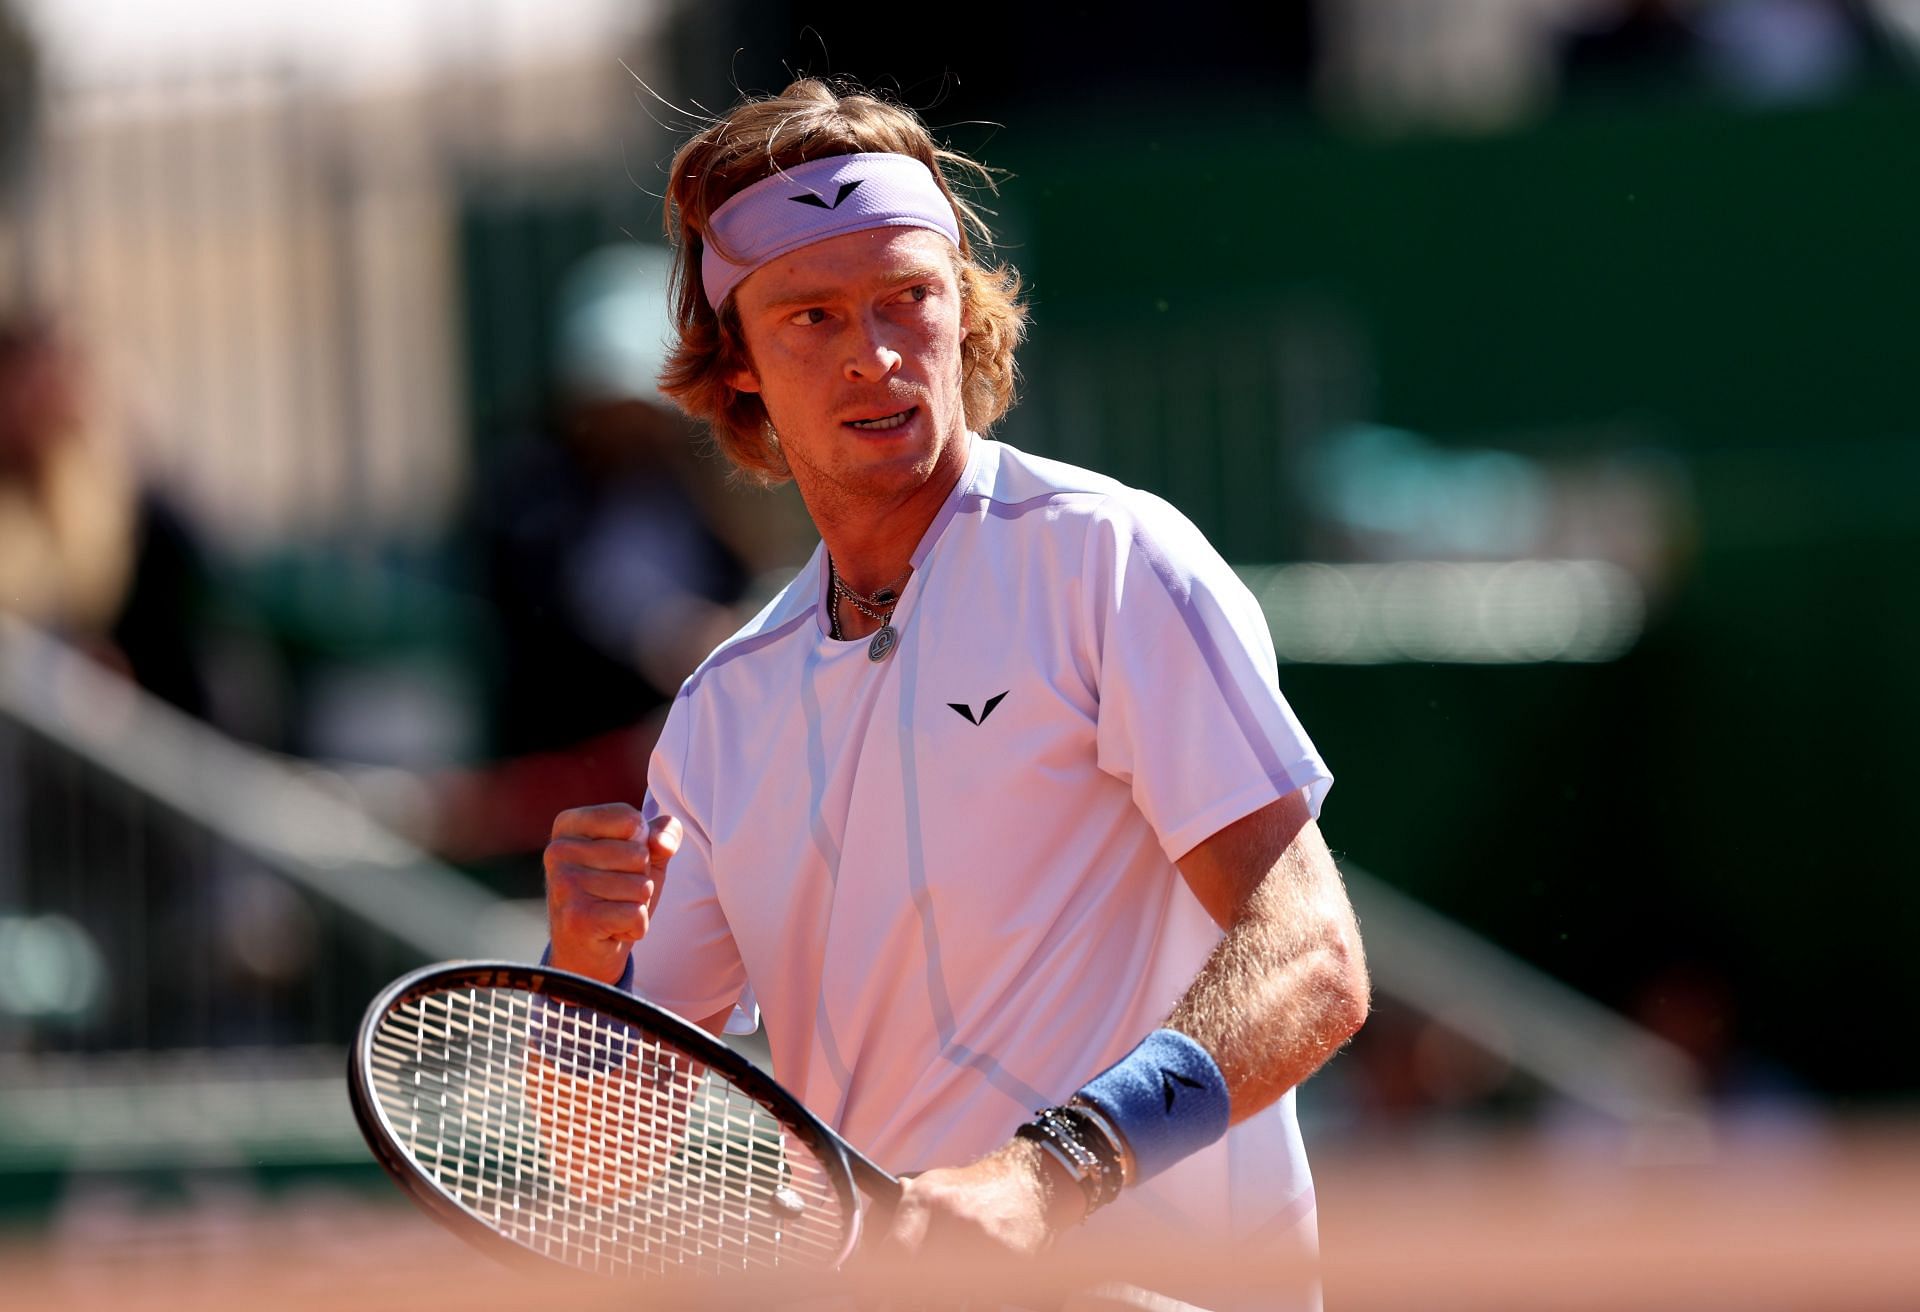 Andrey Rublev is the second seed at the Srpska Open.